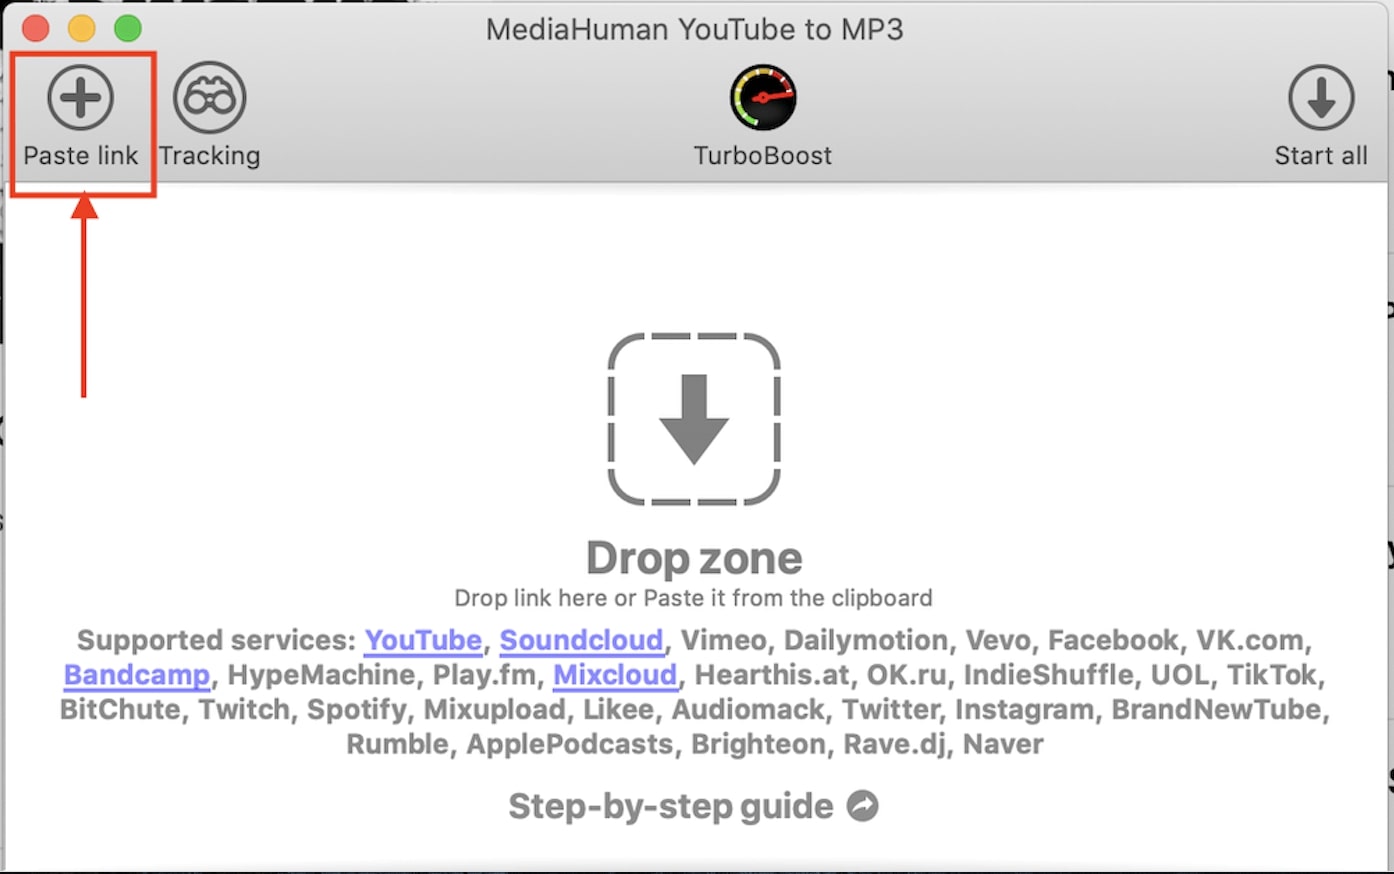  How-to-download-YouTube-qudio-with-MediumHuman-paste-link 